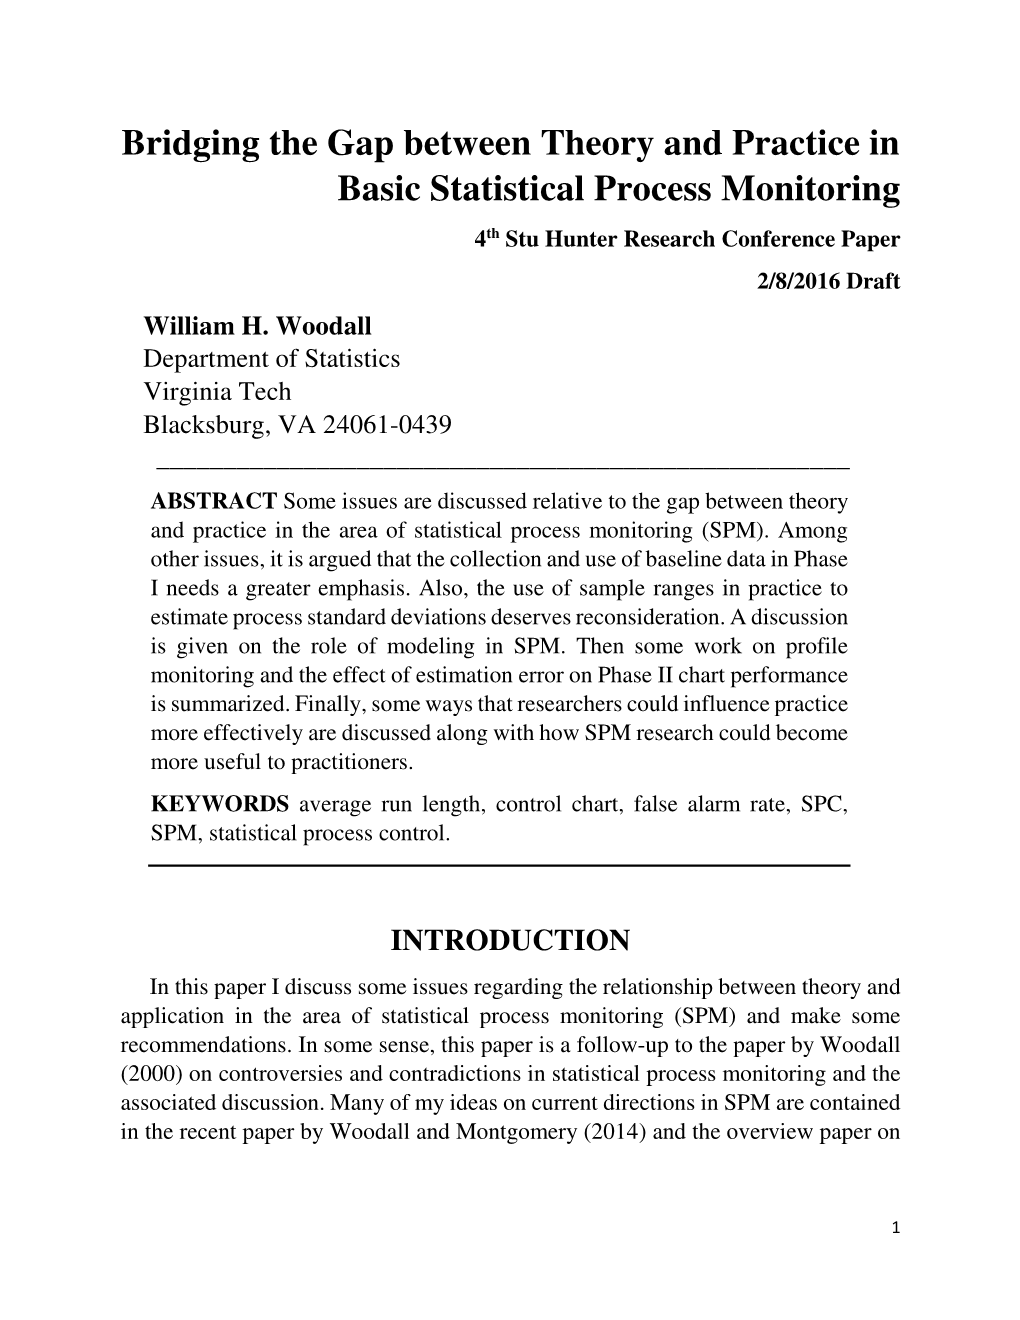 Bridging the Gap Between Theory and Practice in Basic Statistical Process Monitoring 4Th Stu Hunter Research Conference Paper 2/8/2016 Draft William H